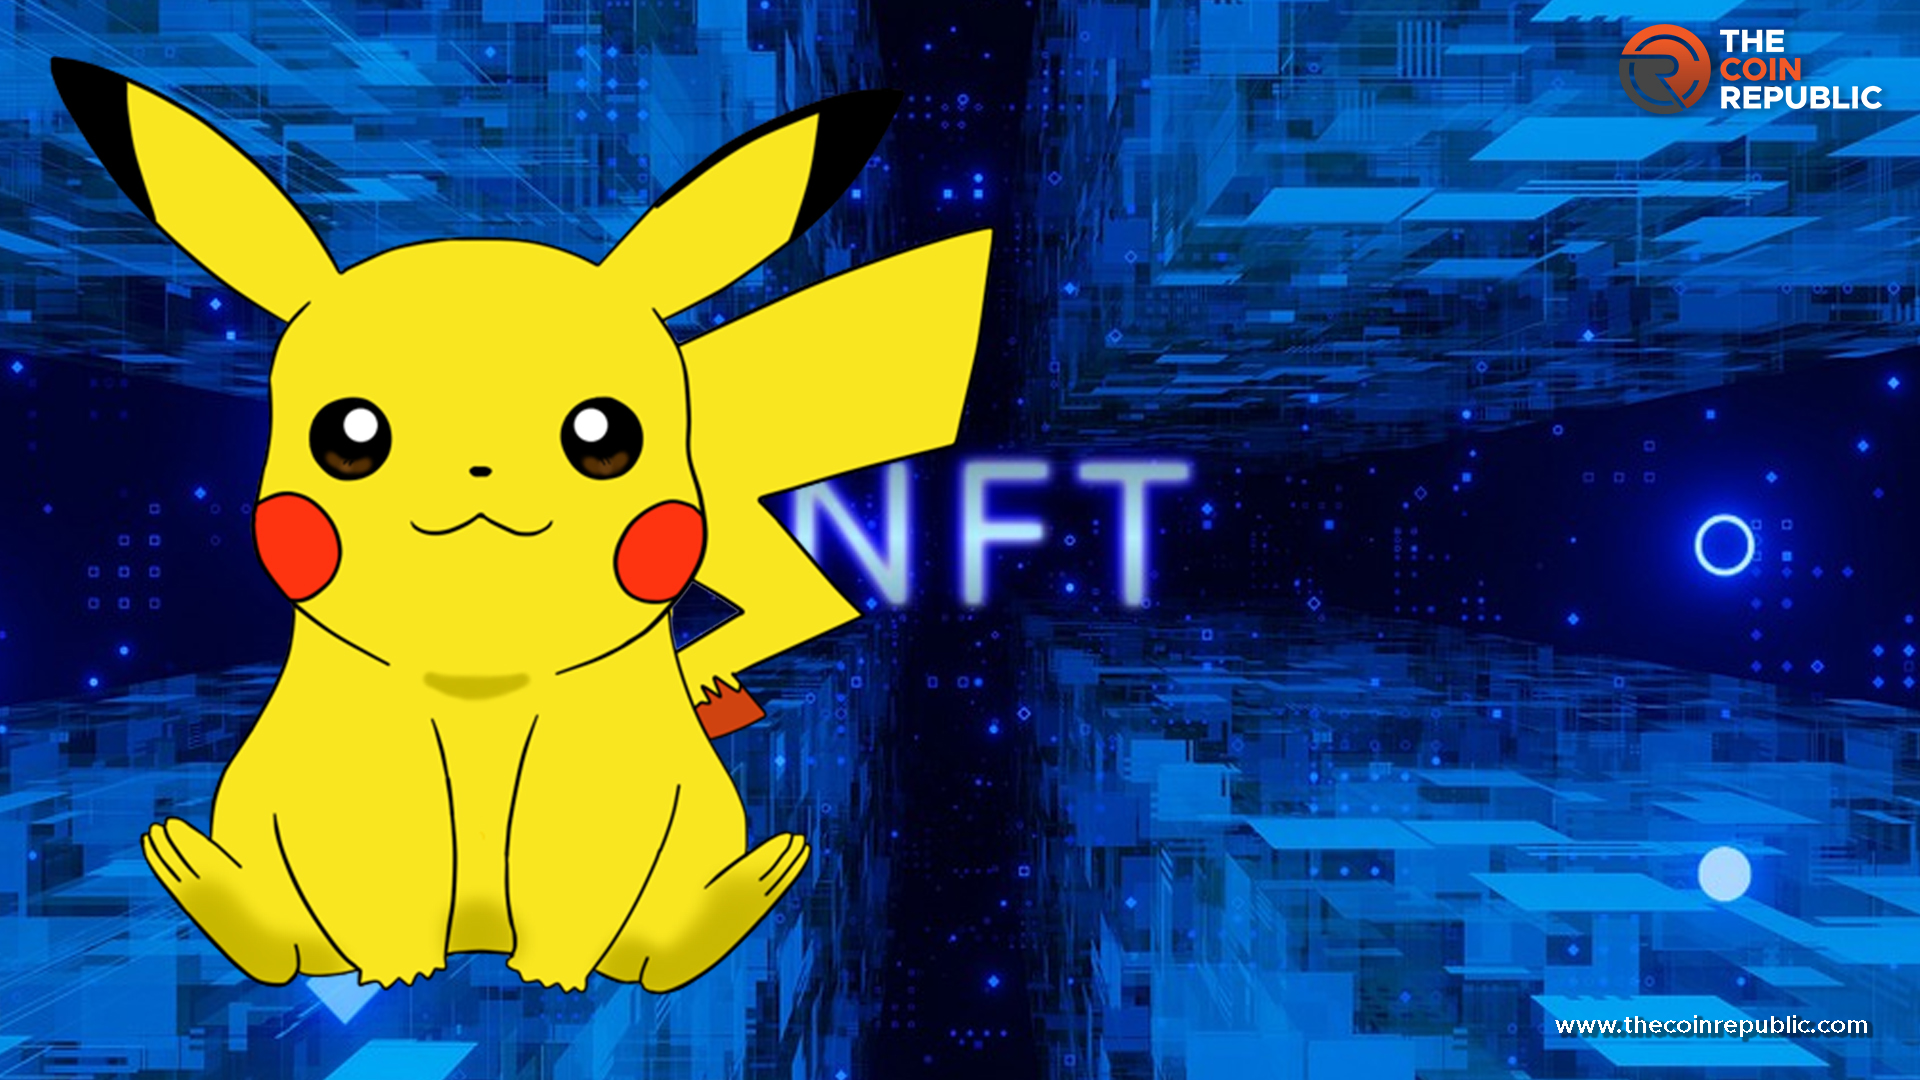 Federal Court Bans “FAKE” Partners From Releasing Pokemon NFTs